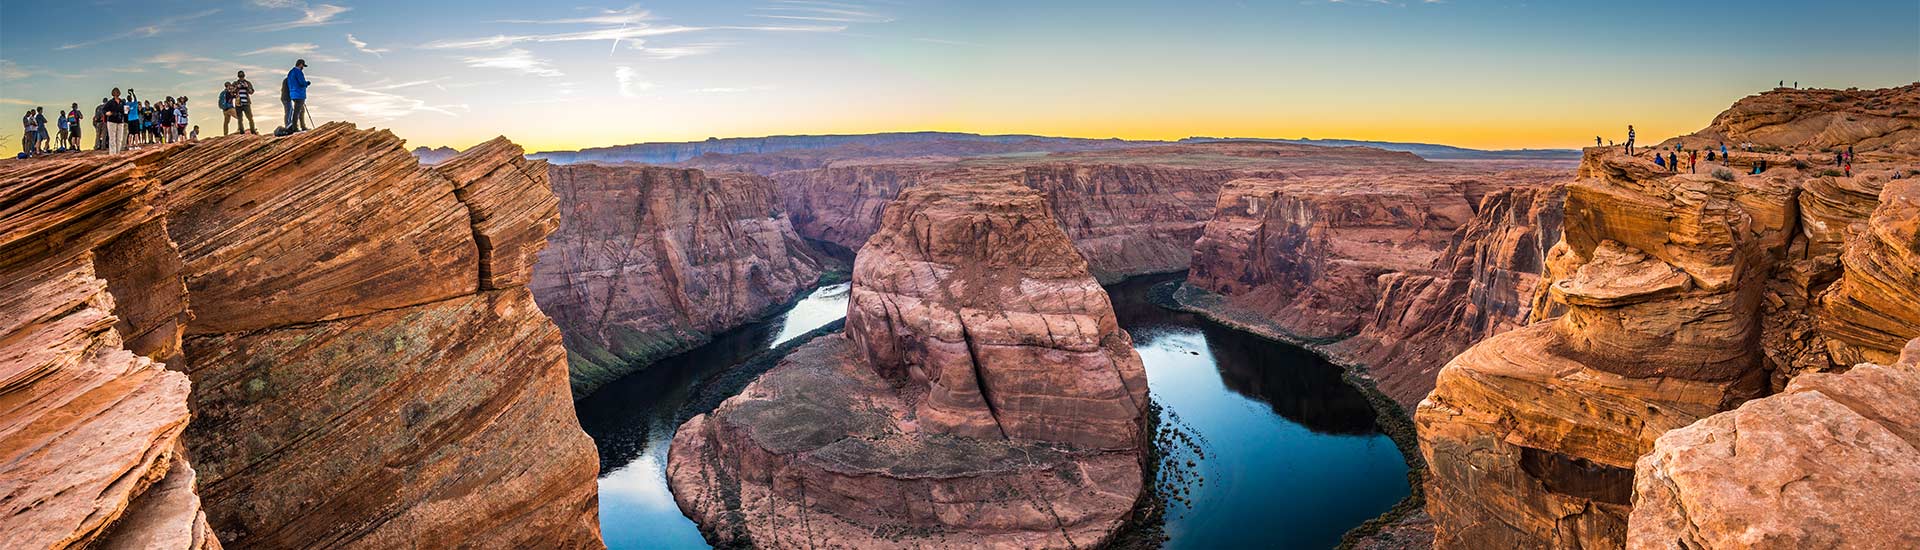 Visitors at the edge of the Grand Canyon rim, overlooking Horseshoe Bend and Colorado River during sunset.